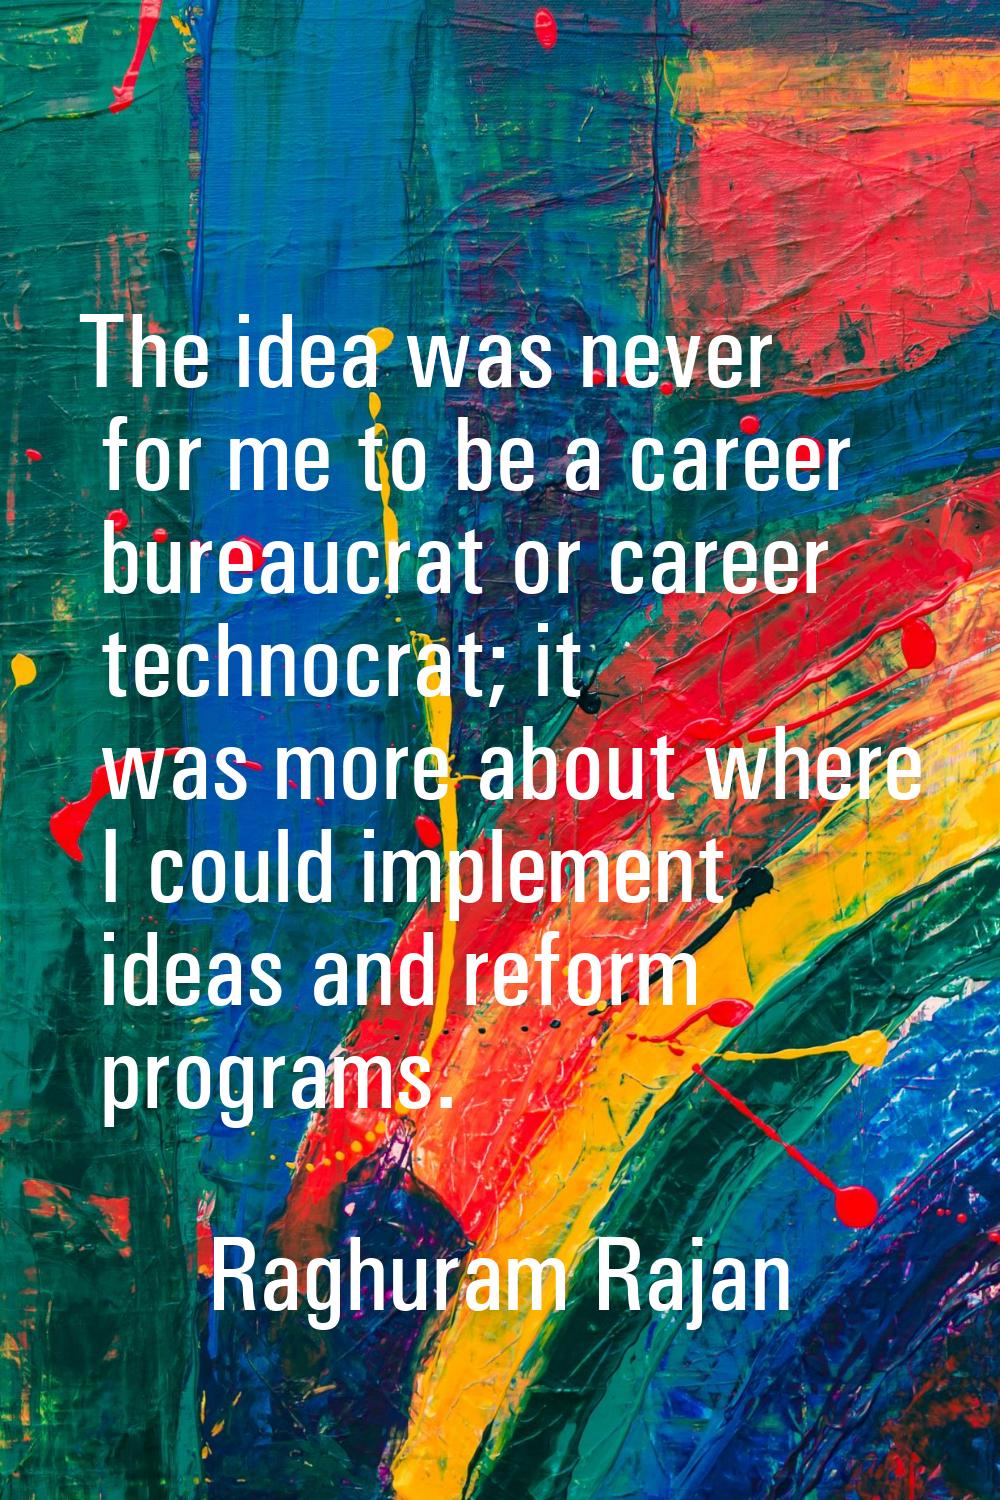 The idea was never for me to be a career bureaucrat or career technocrat; it was more about where I